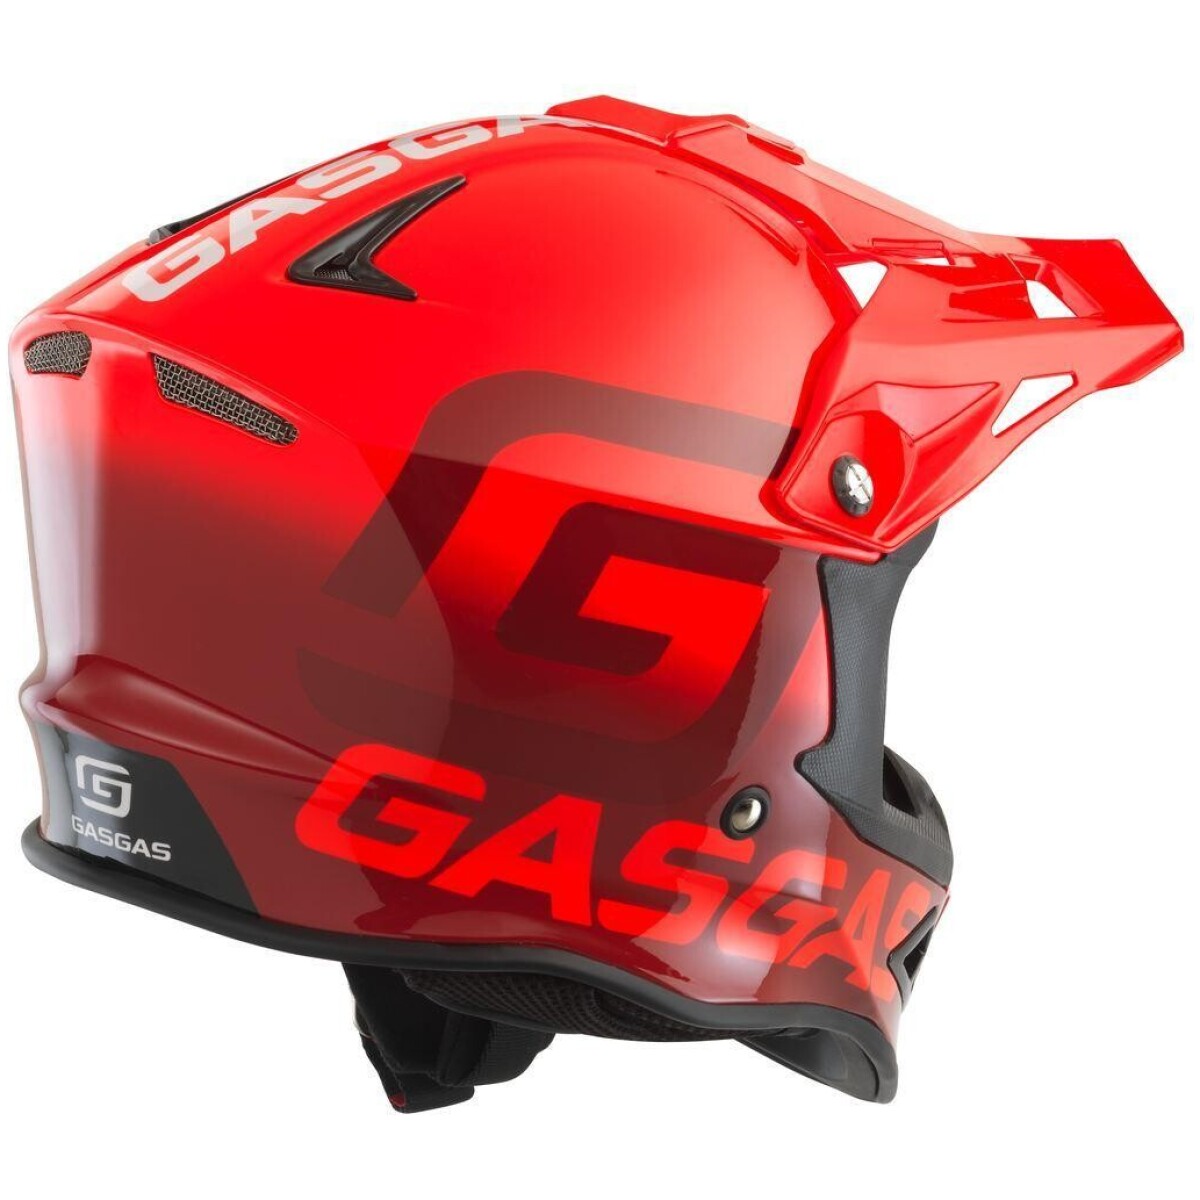 GasGas Offroad Helm Rot